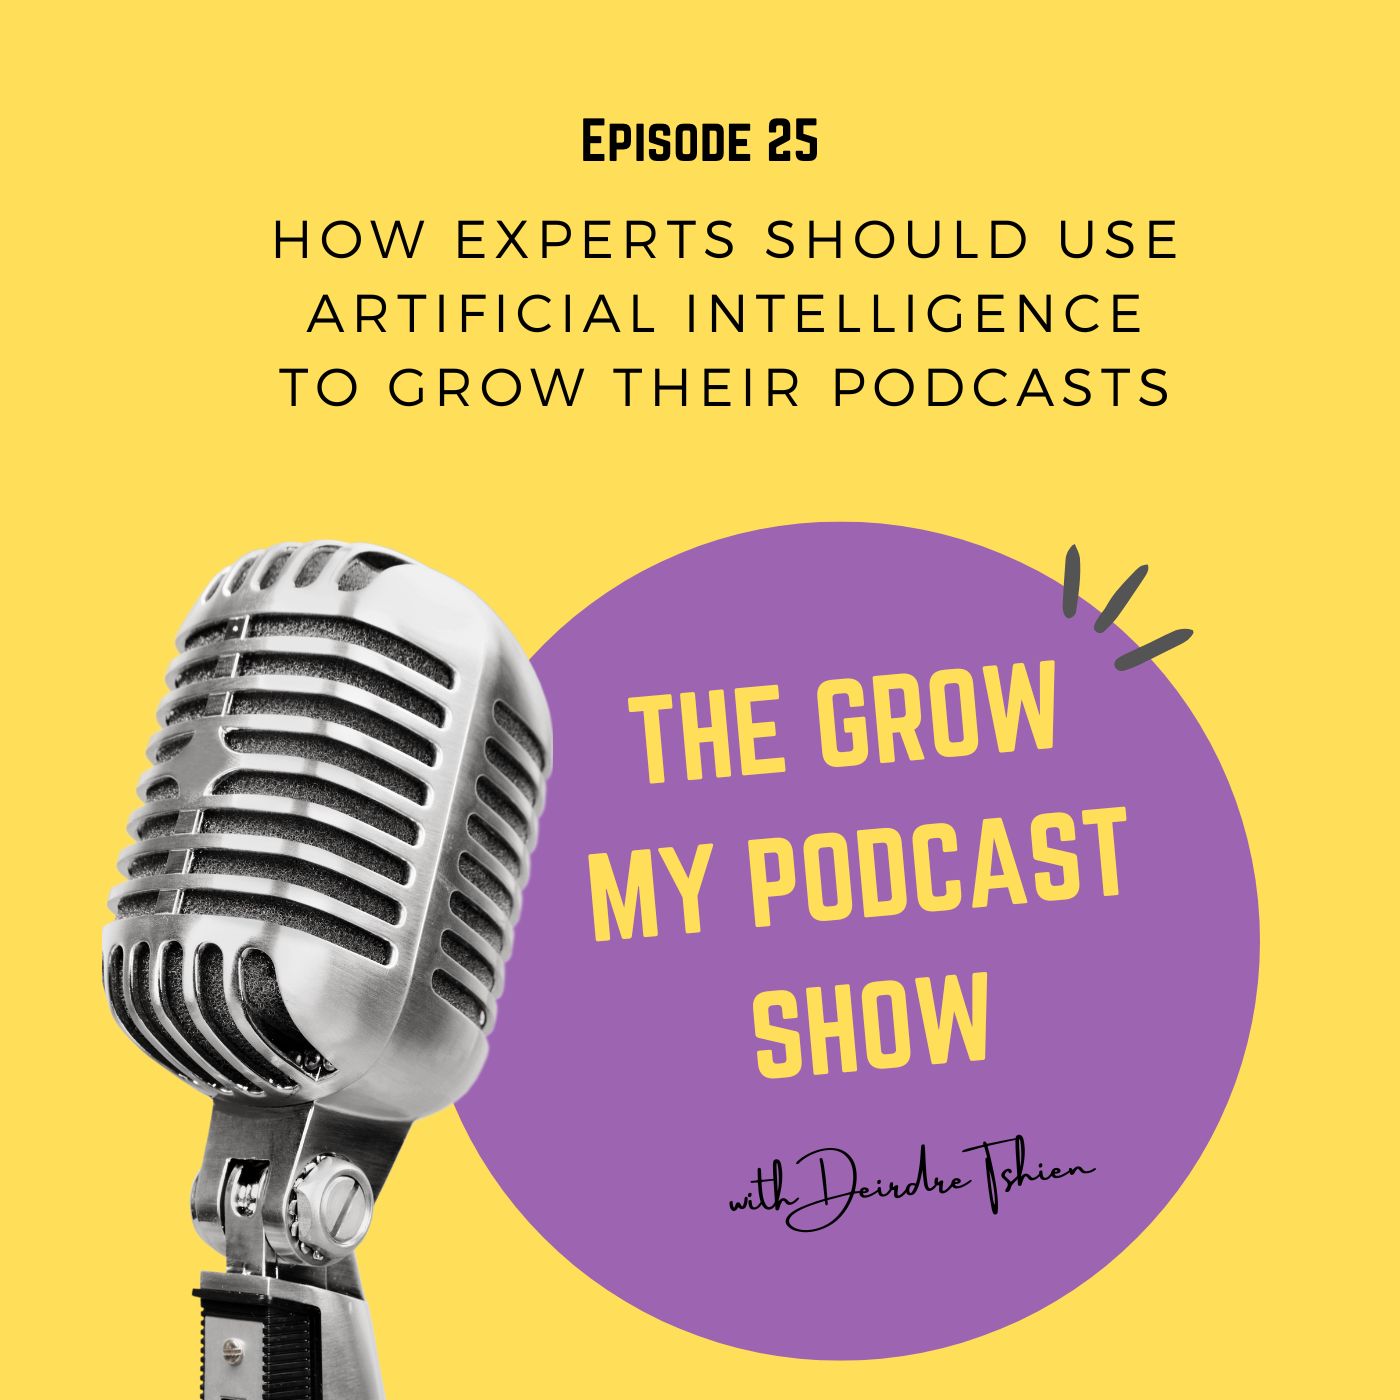 How Experts should use Artificial Intelligence to grow their podcasts Image